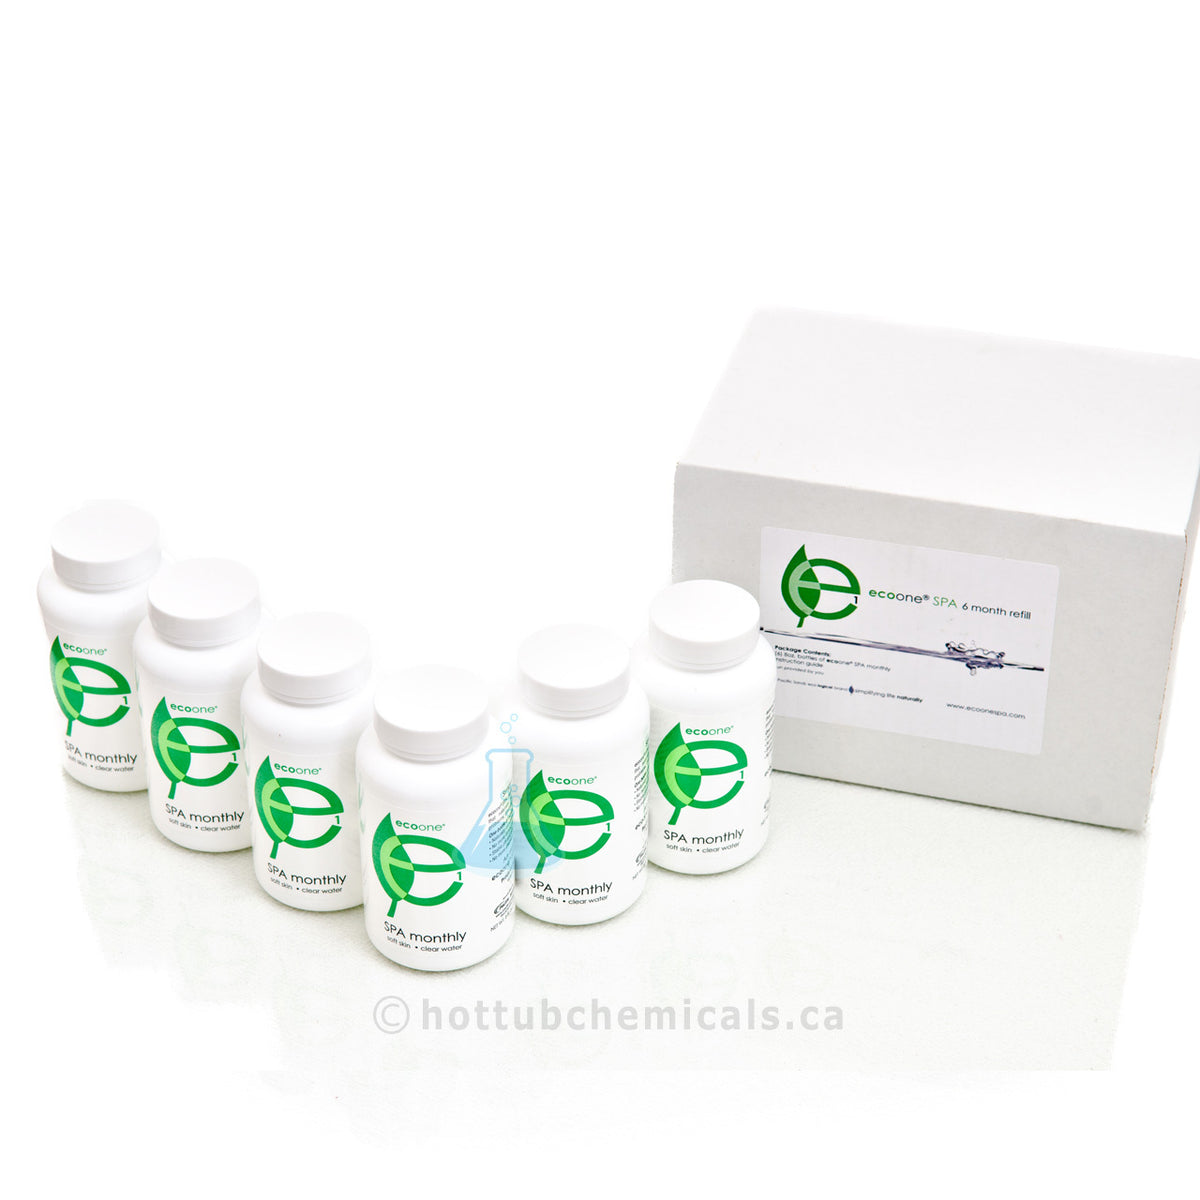 EcoOne 6 Month Refill Kit - hottubchemicals